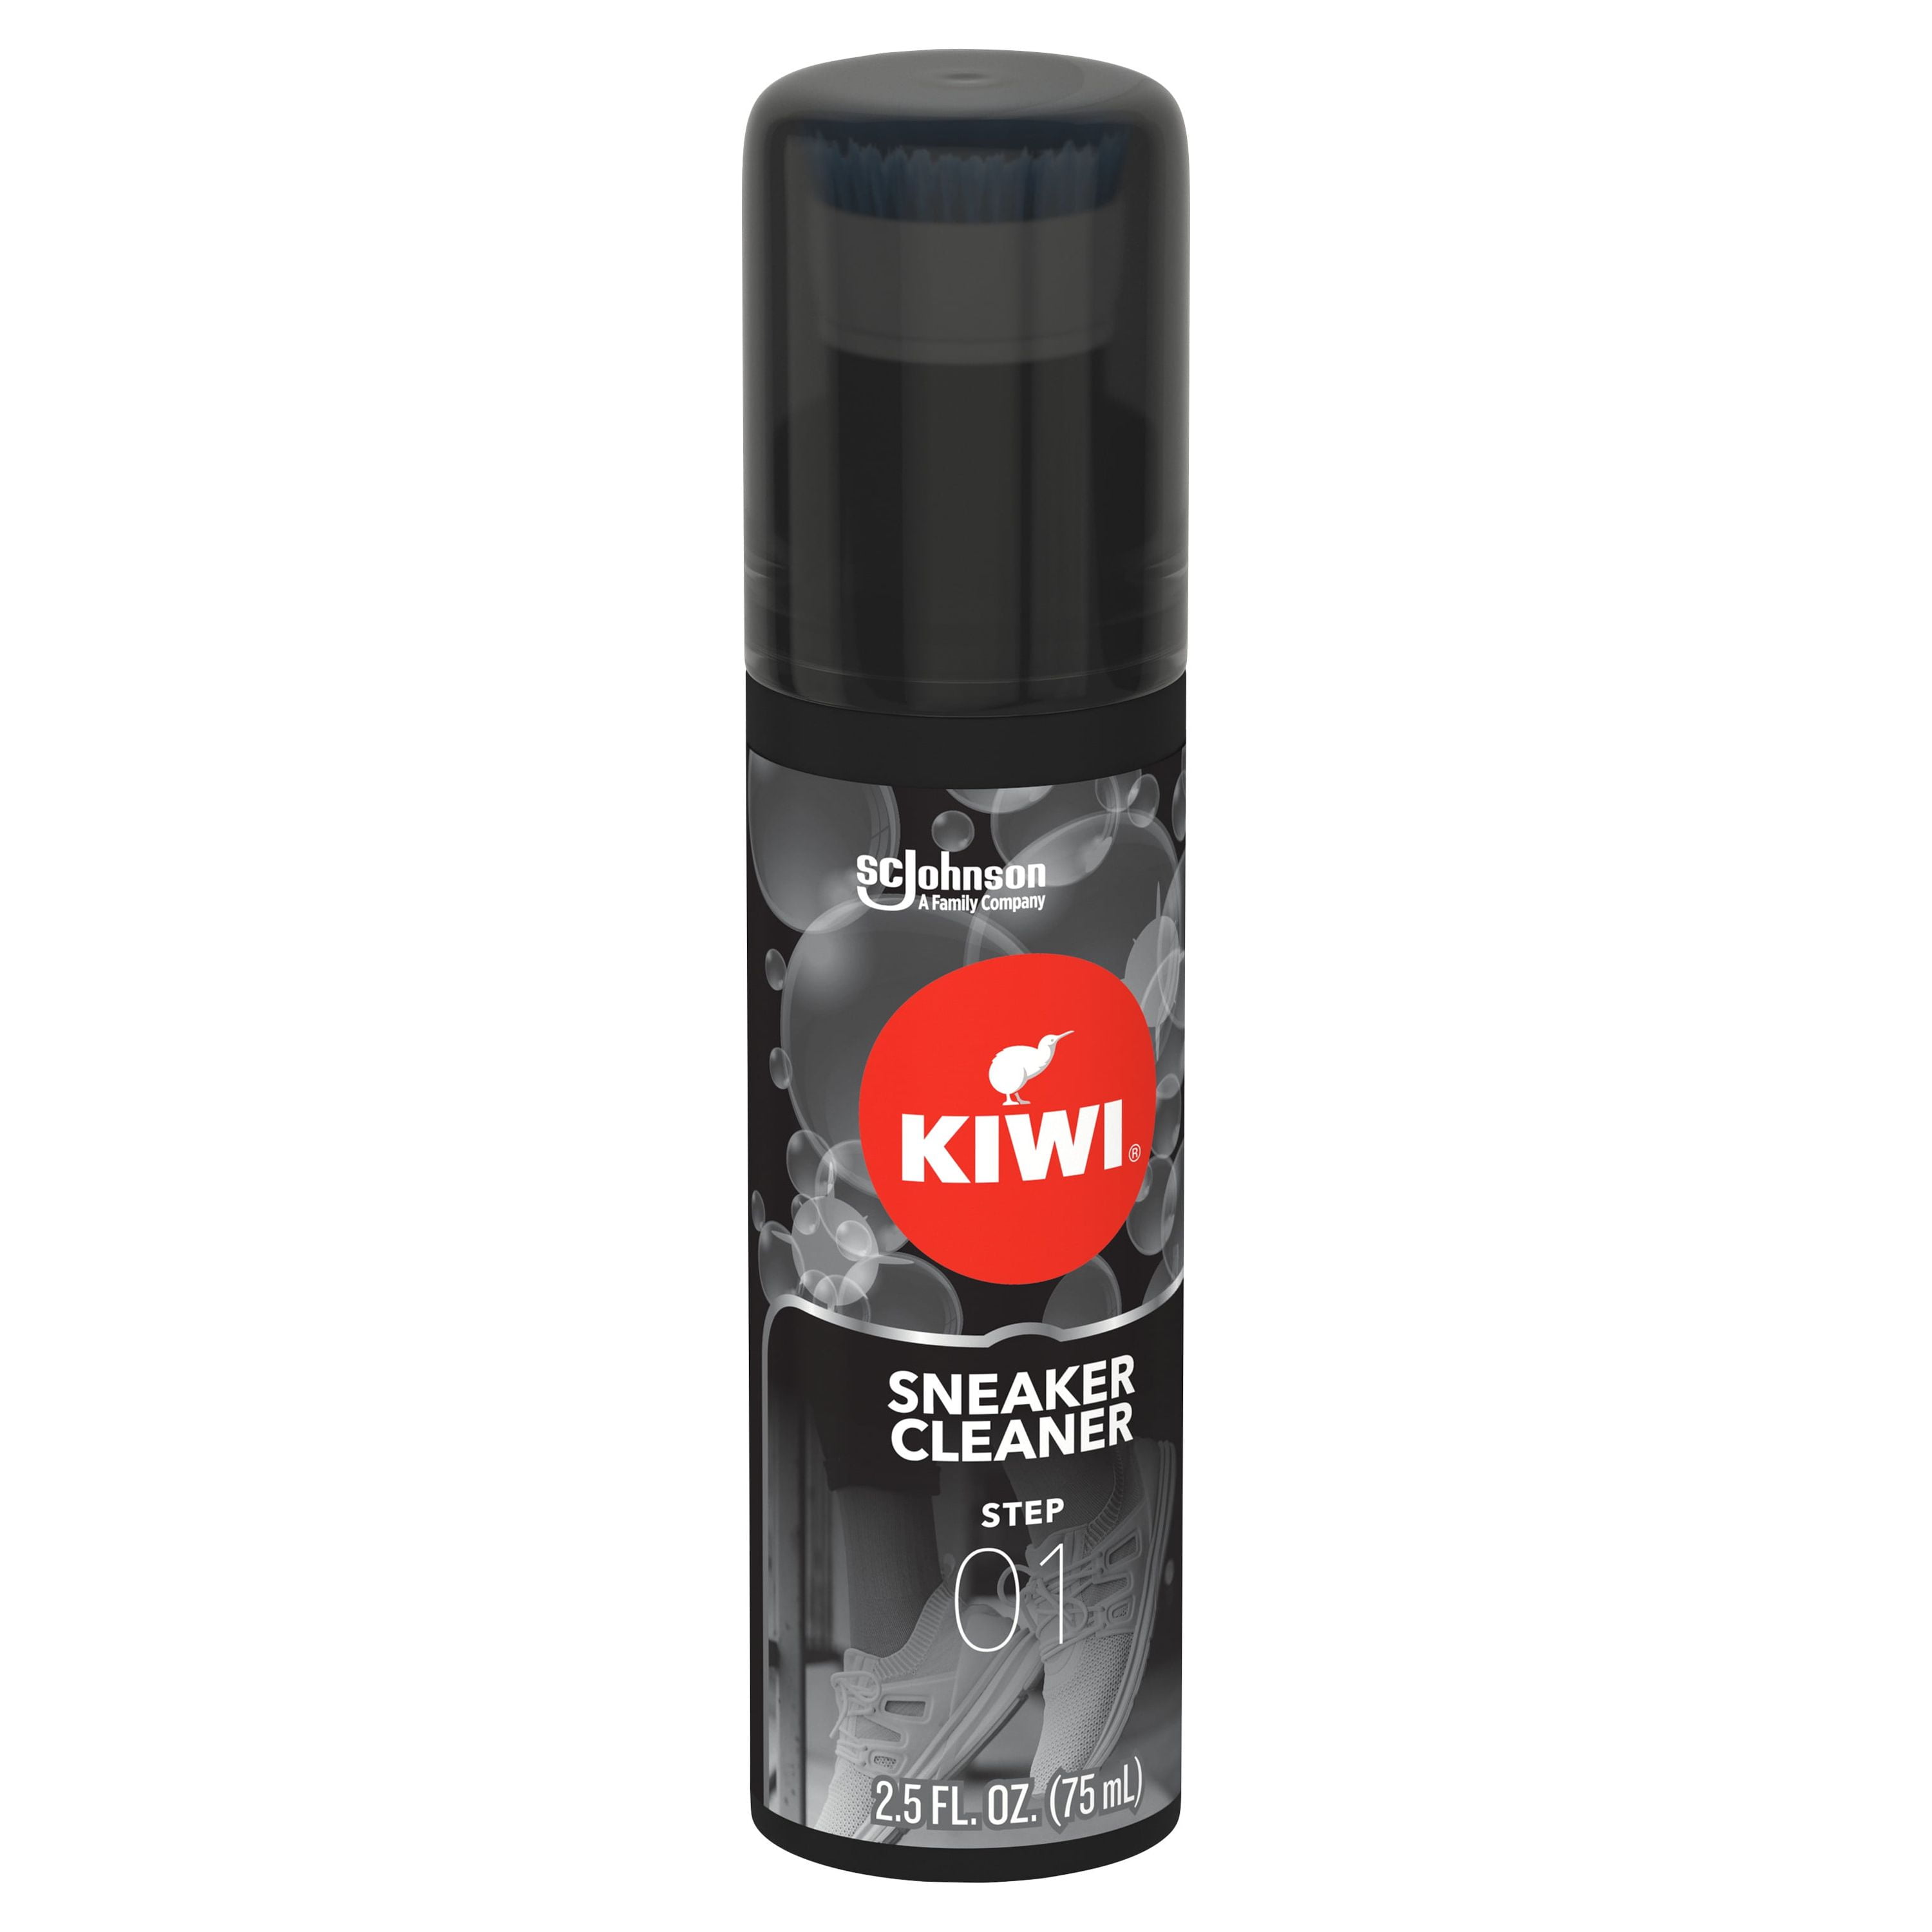 Absolutely crazy! Kiwi shoe whitener. $3.46 at Walmart, you can find i